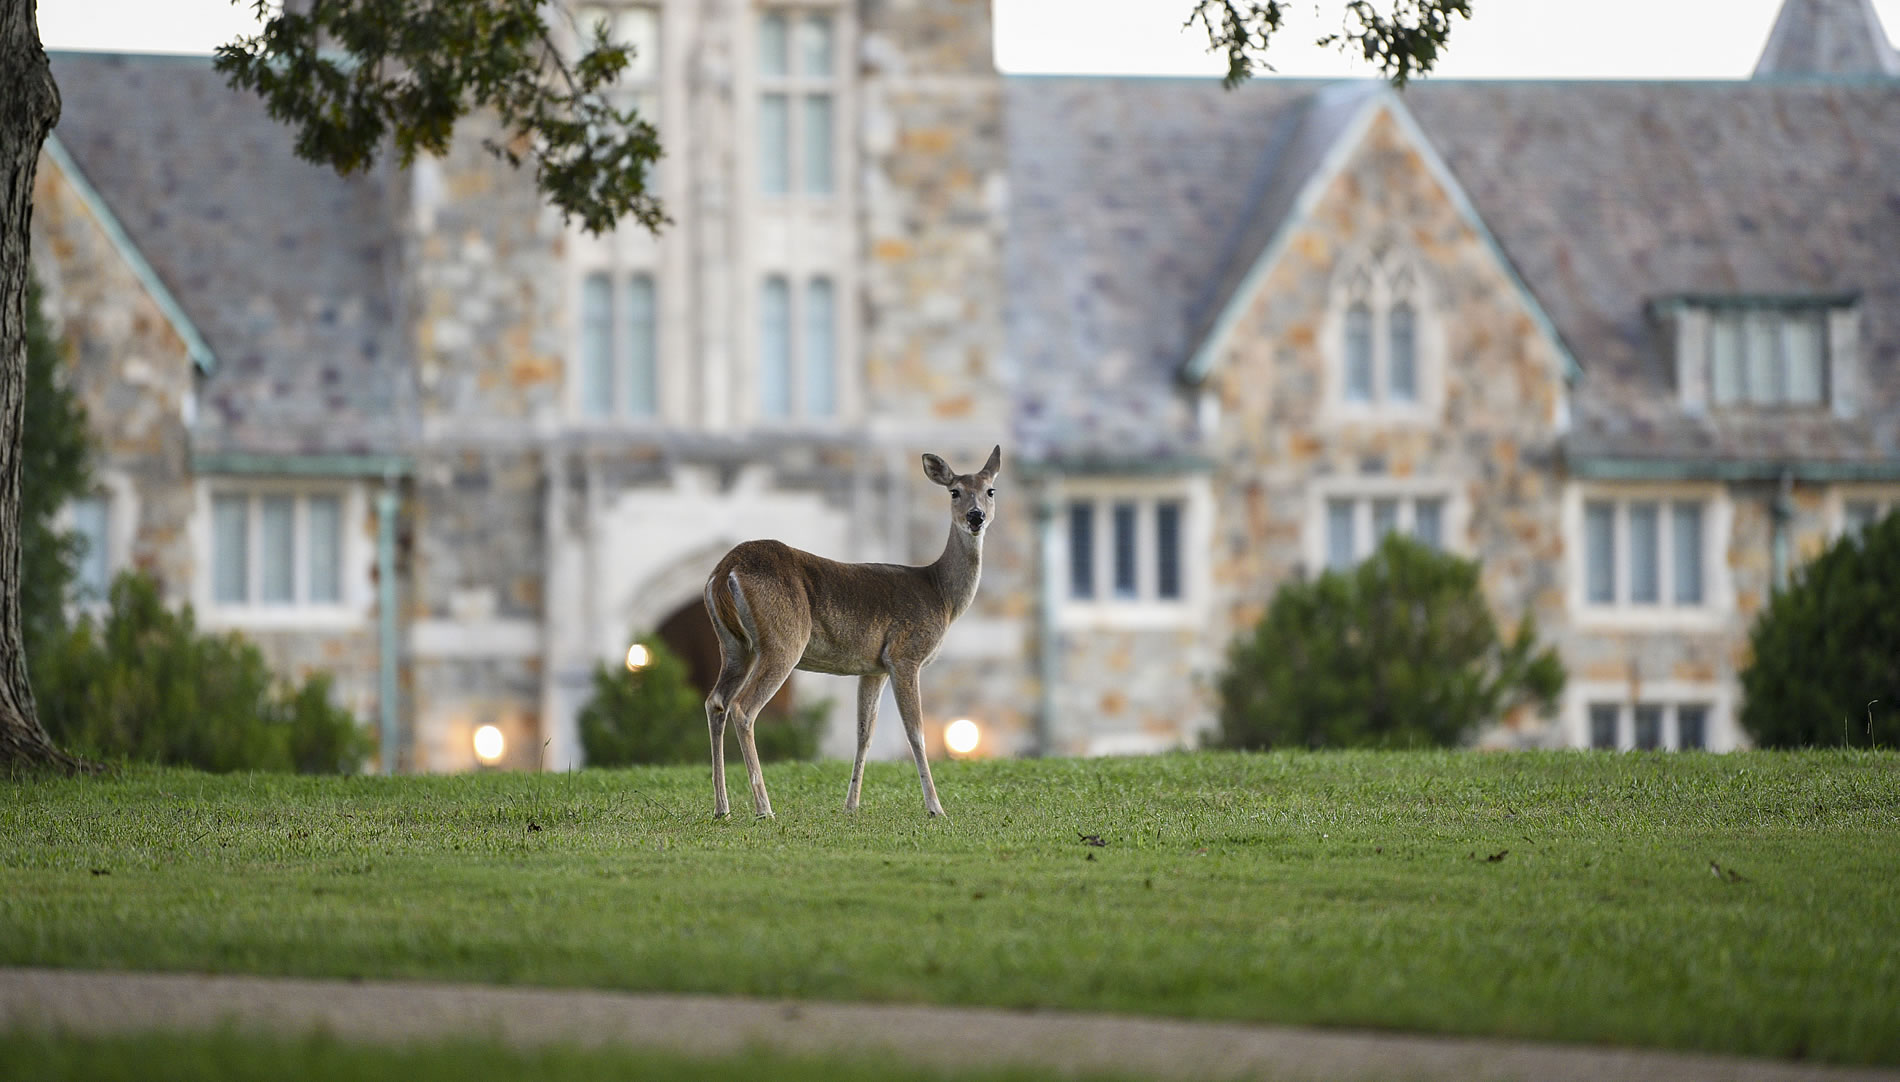             Berry College listed by Architectural Digest for Beauty.       